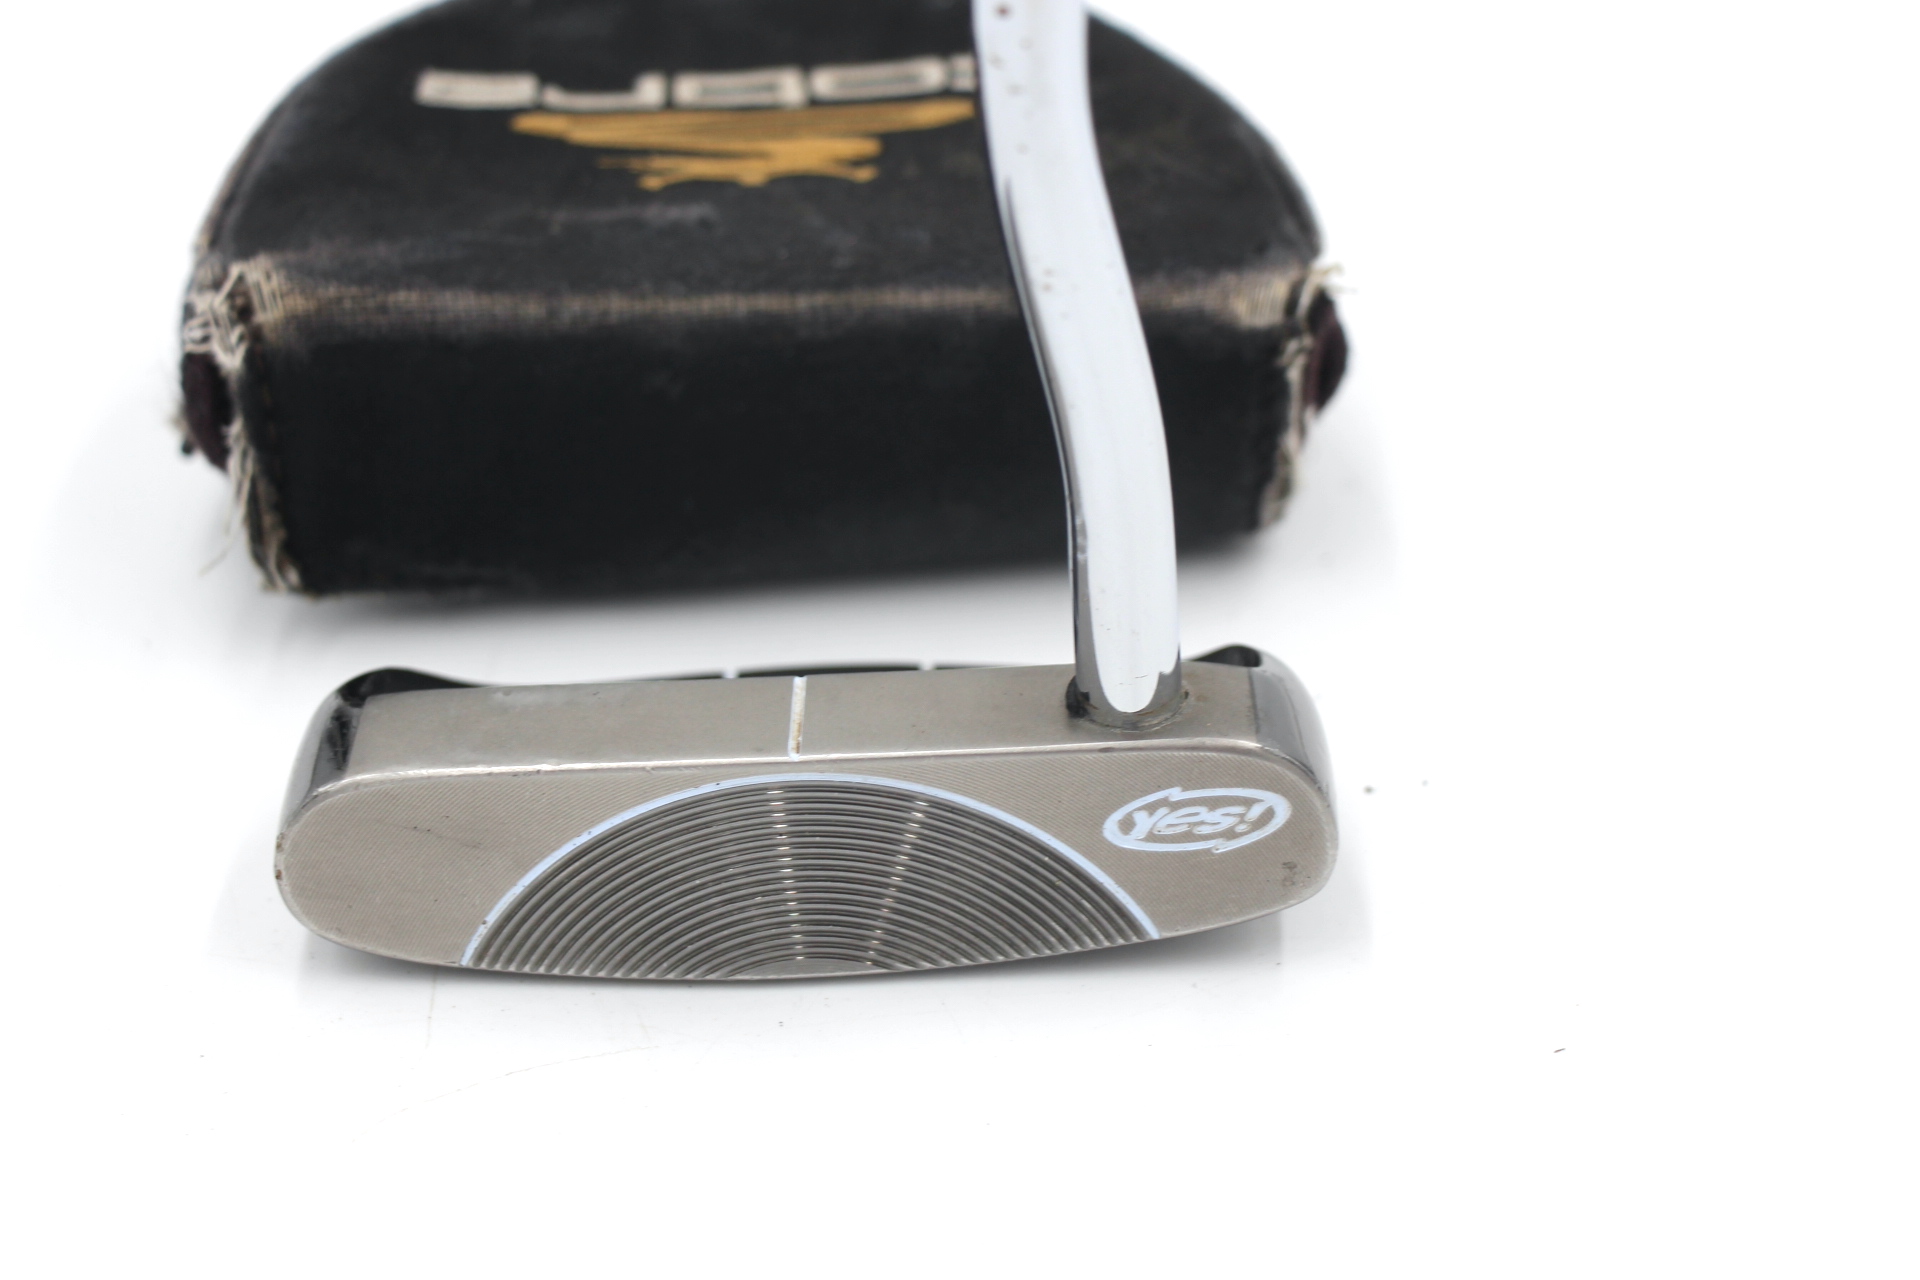 Yes! C-Groove Marilyn Putter